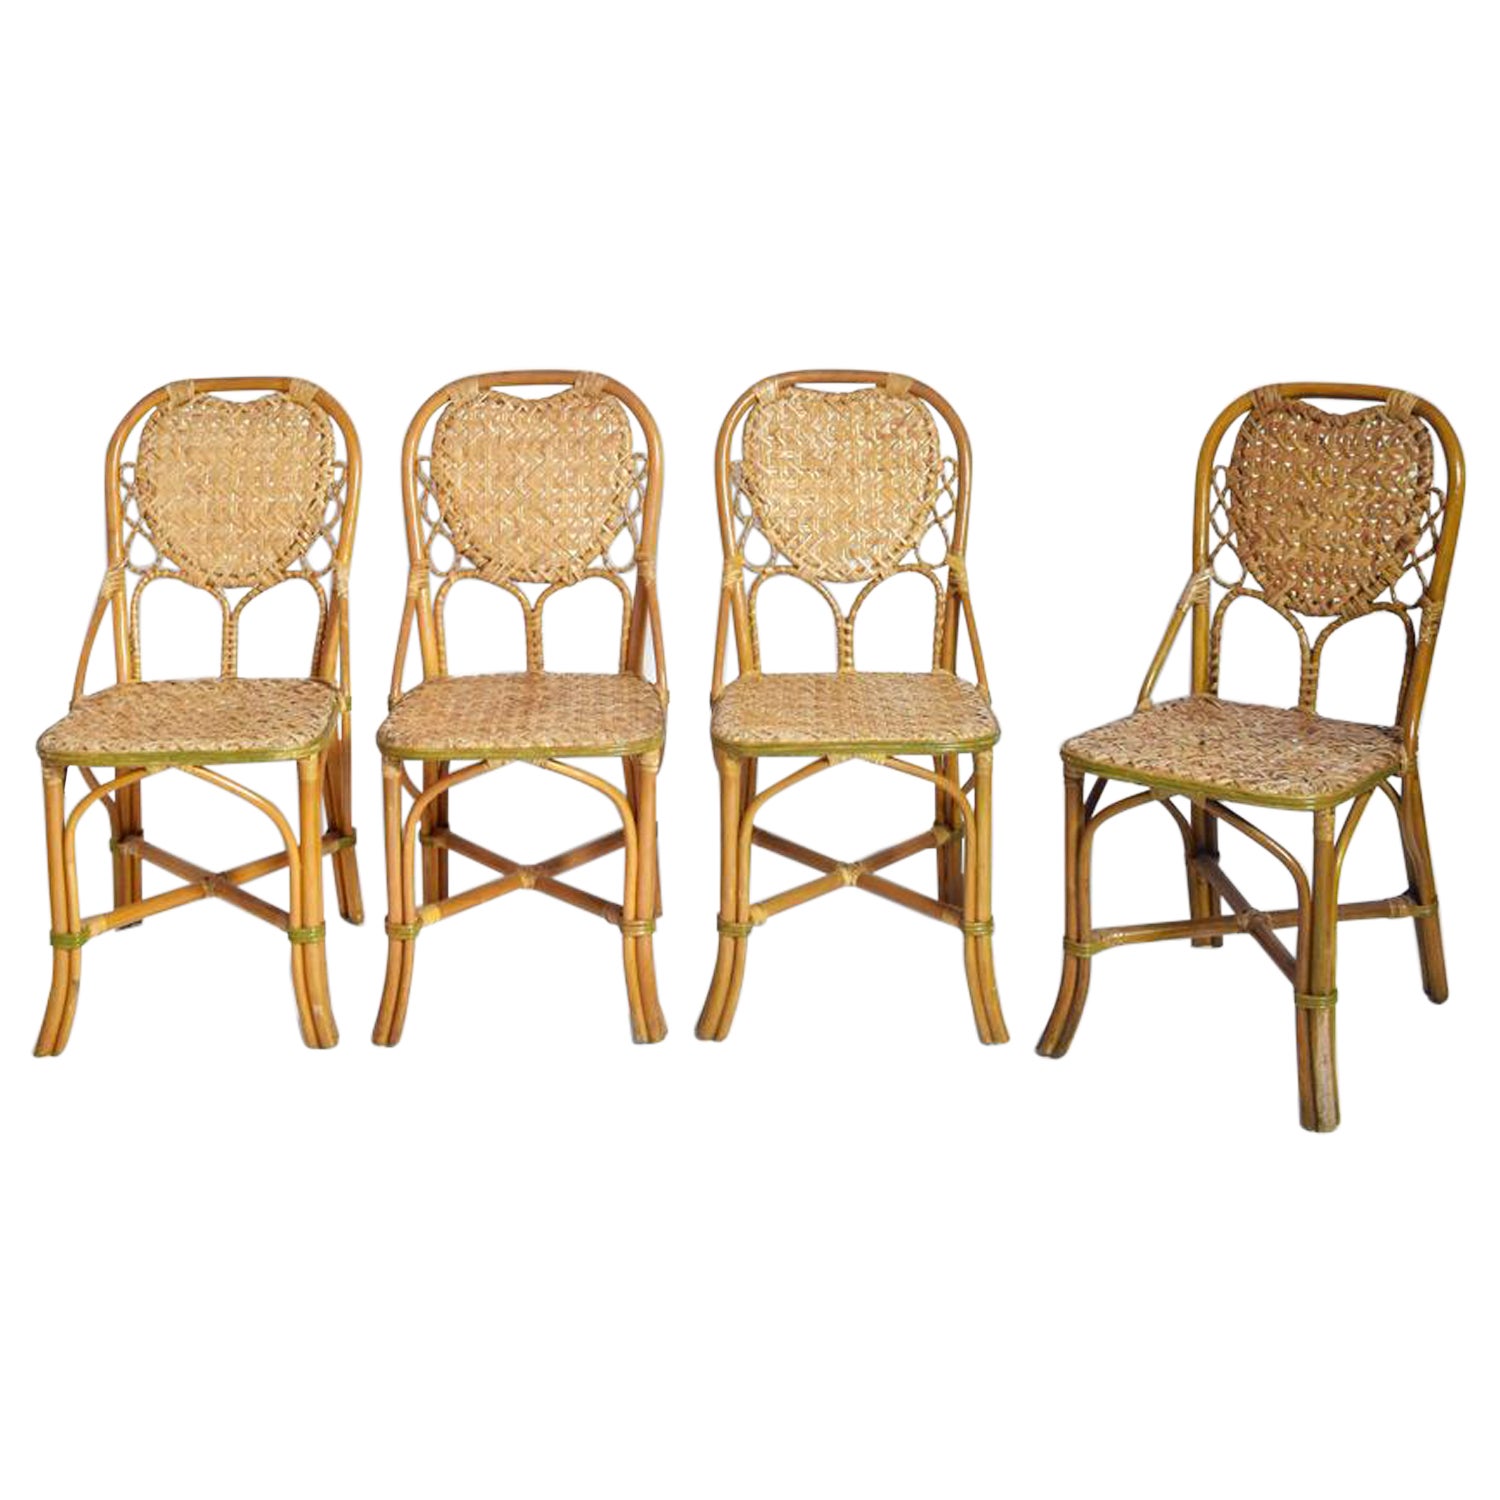 Set of 4 rattan chairs, 1970s. For Sale